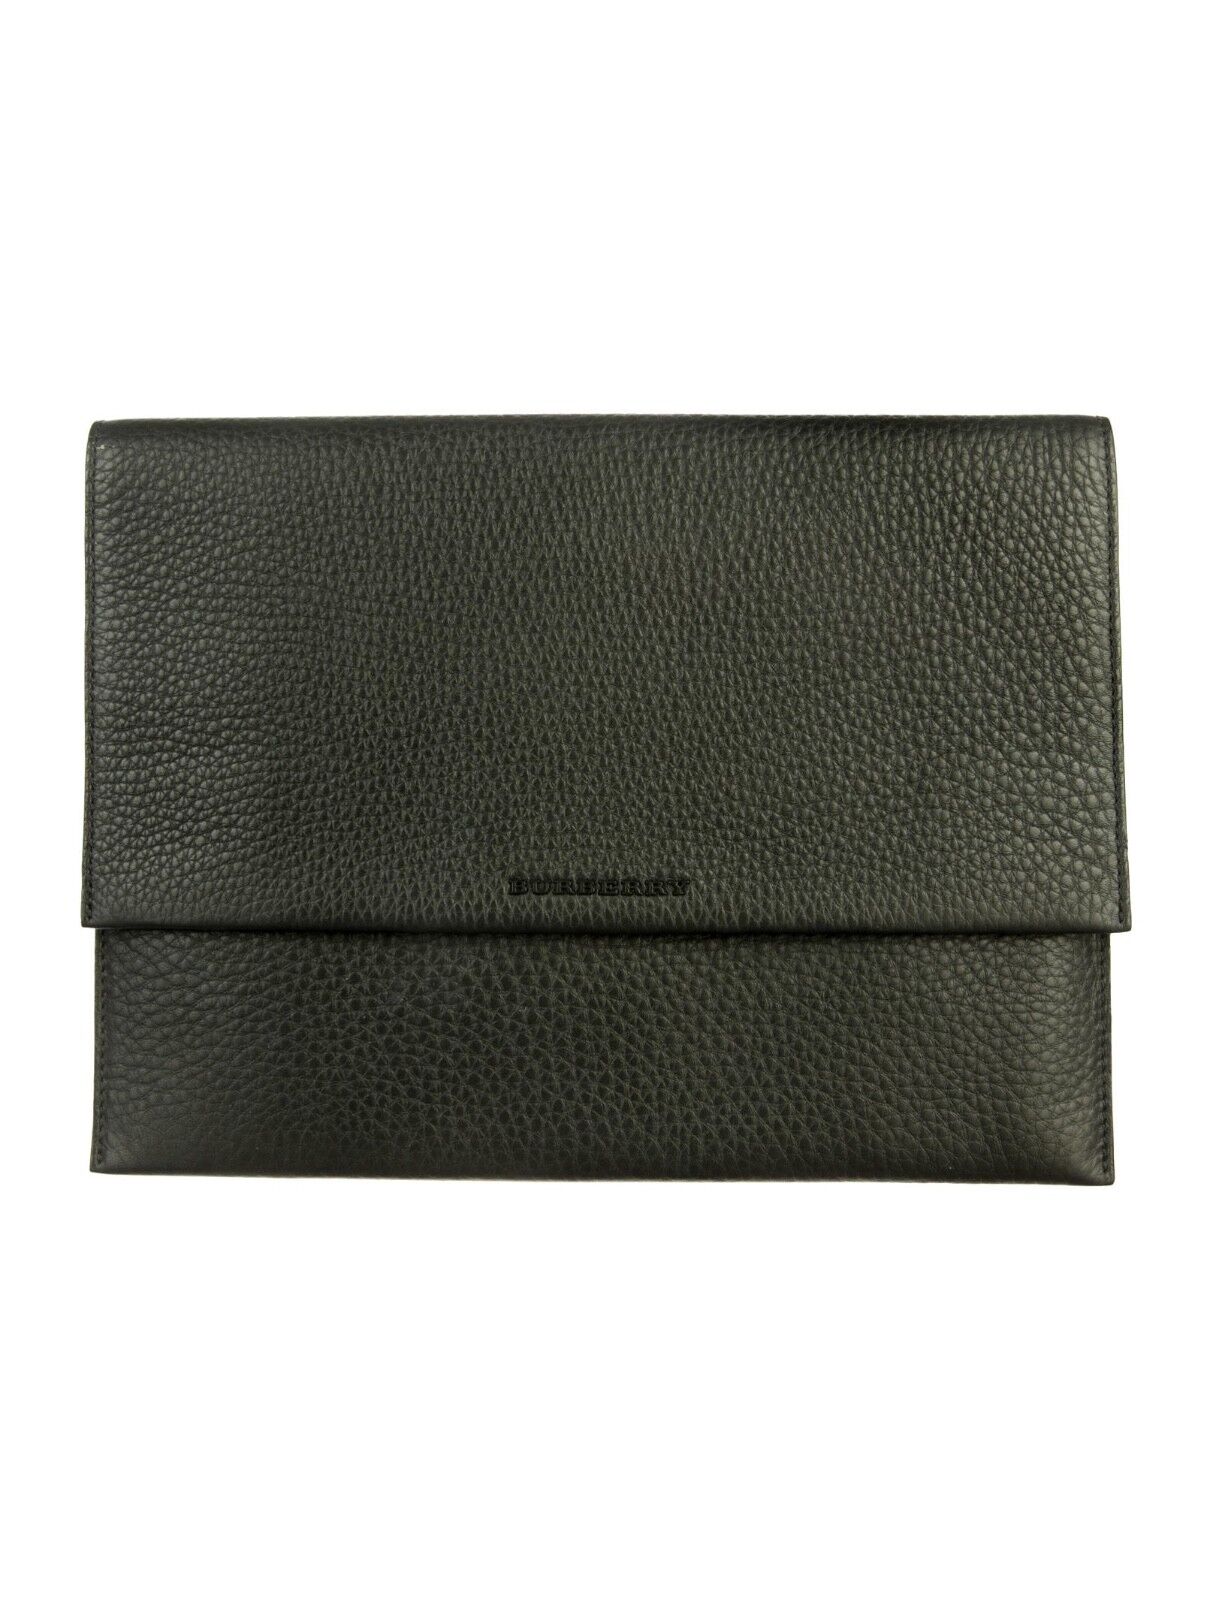 BURBERRY NORTHCHURCH LEATHER IPAD AIR CASE SLEEVE Olive Green $595 RARE